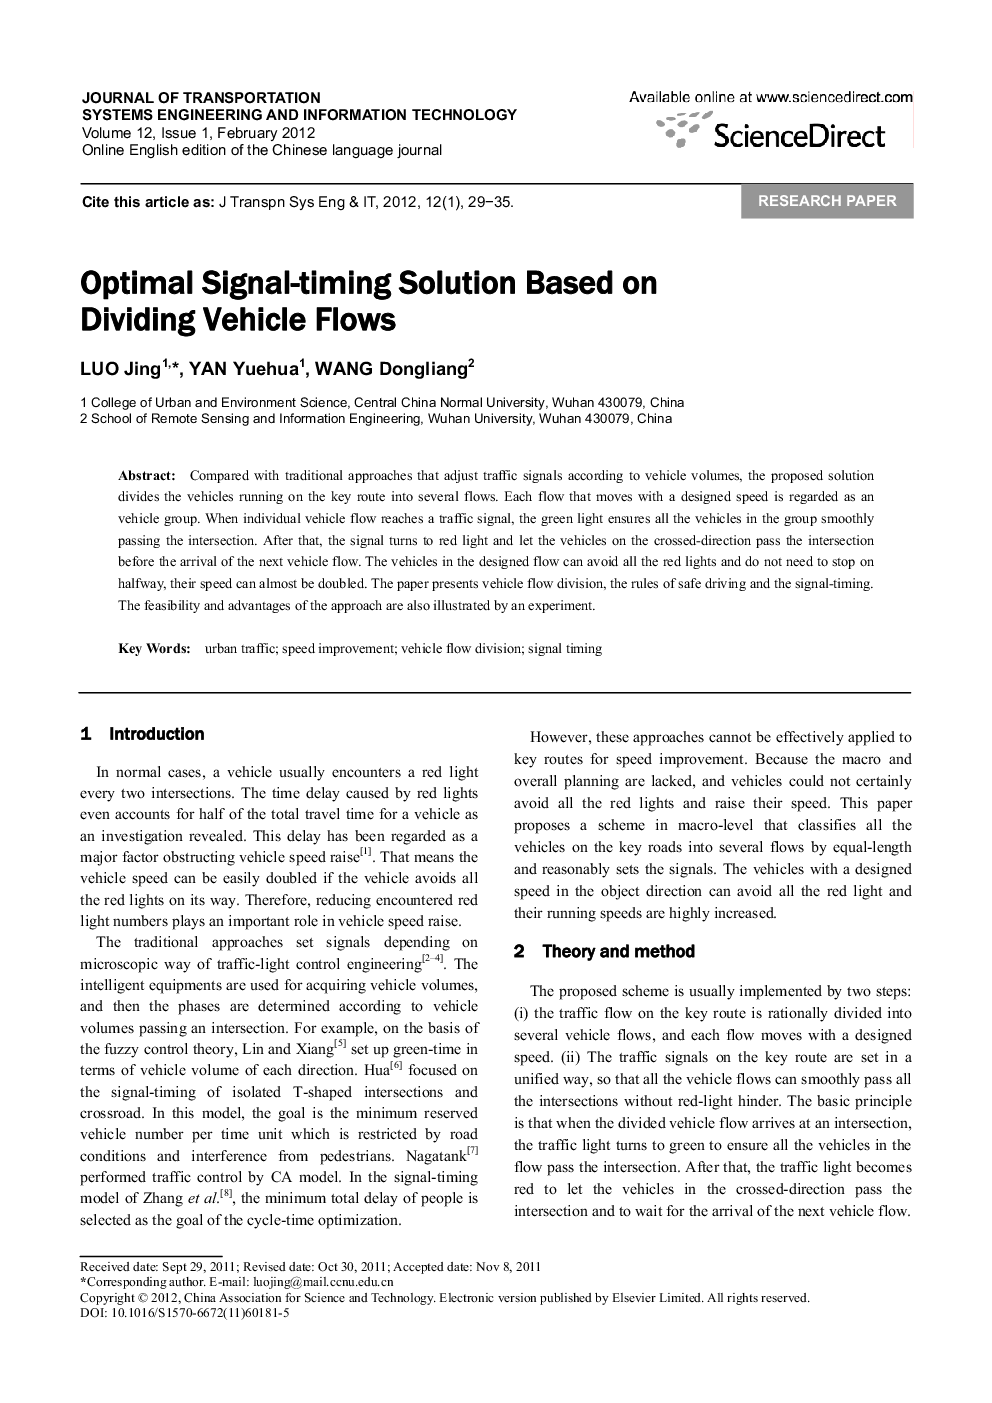 Optimal Signal-timing Solution Based on Dividing Vehicle Flows